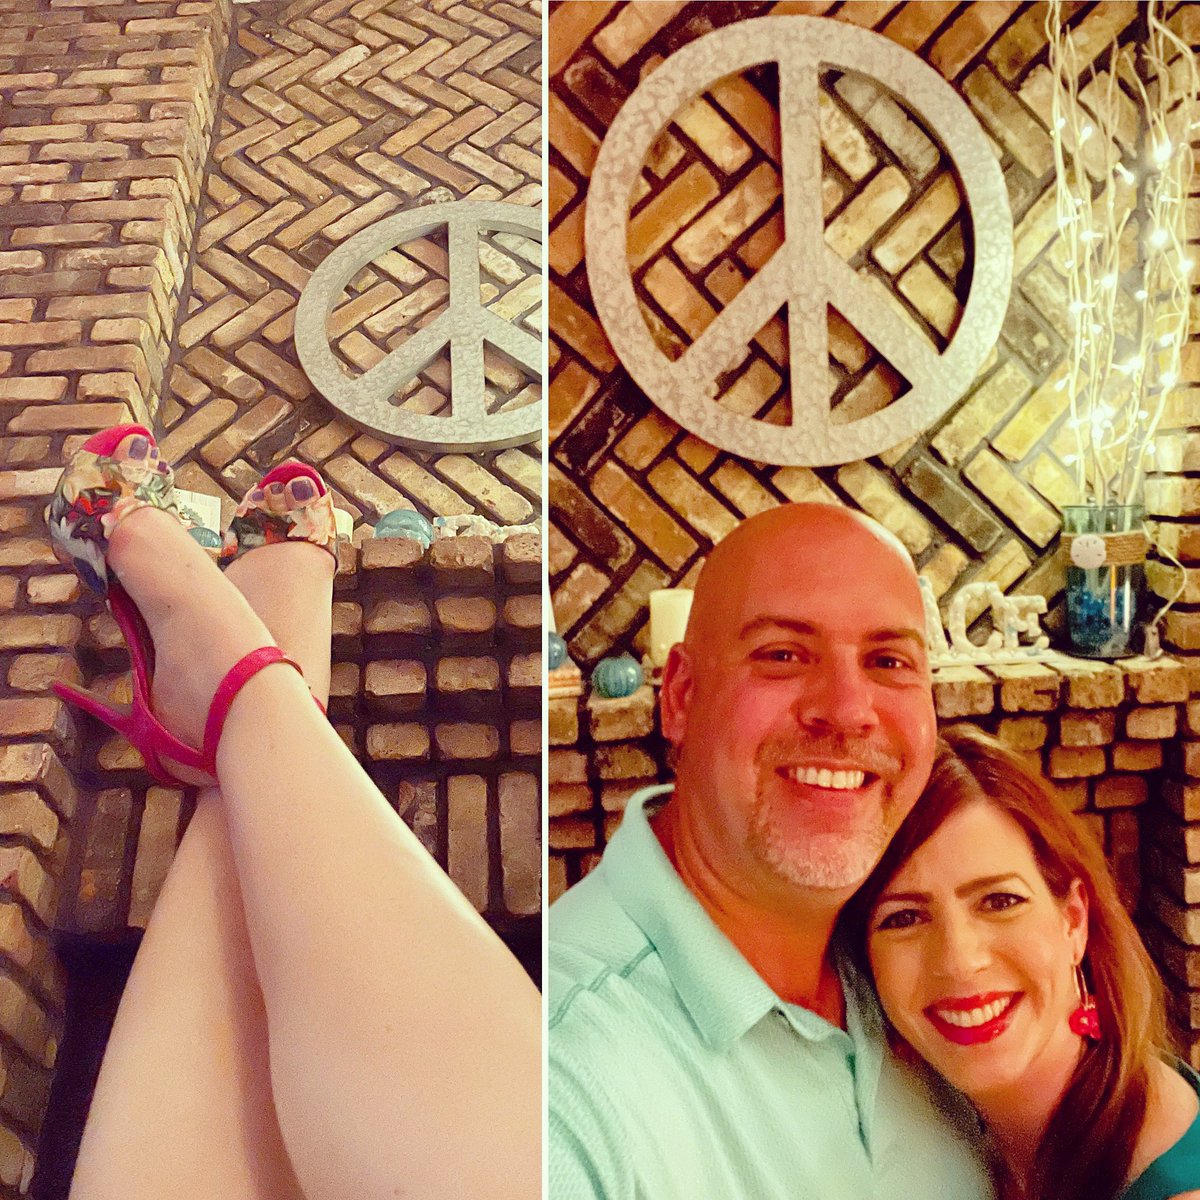 The #redshoes and #pinkshoes continue for #valentines day with these @guess #strappyheels with a #tropical print and coordinating @loft dress to match my wonderful Scott, for today’s #daytrip to #orlando ❤️💞#guessshoes #matchingoutfits #peace #shoelove365 #shoes #shoelove